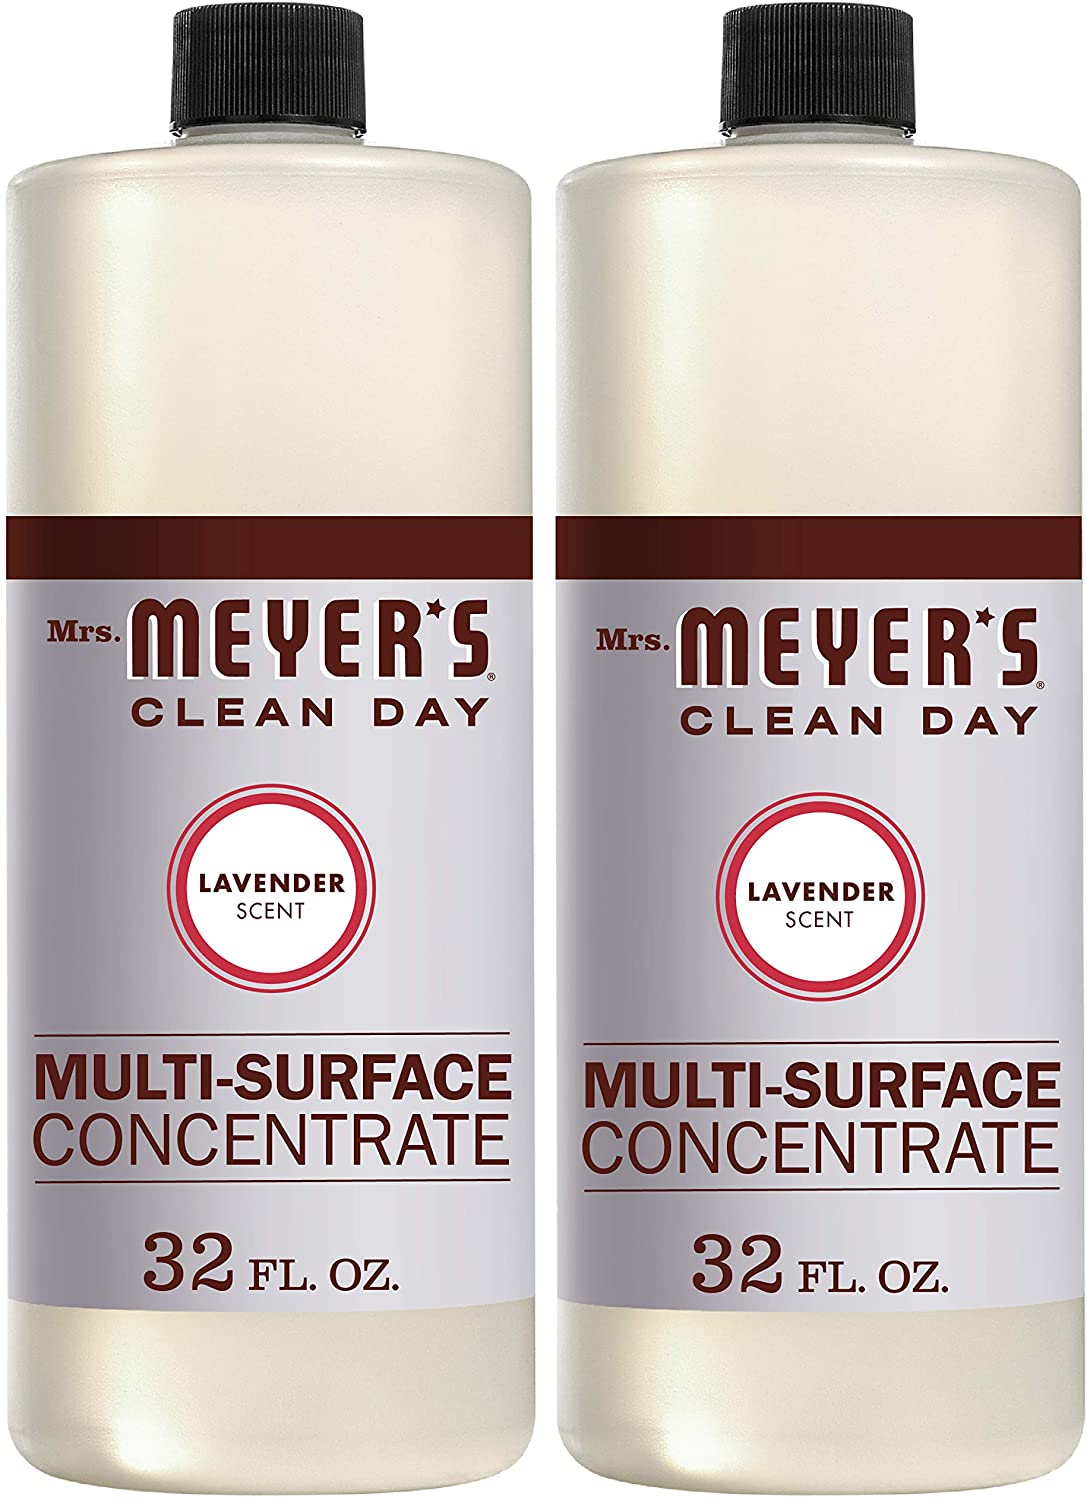 Amazon: Mrs. Meyer's Clean Day Multi-Surface Cleaner Concentrate, Lavender Scent, 32 Oz - Pack of 2 $10.65 w/ S&S + Free Shipp